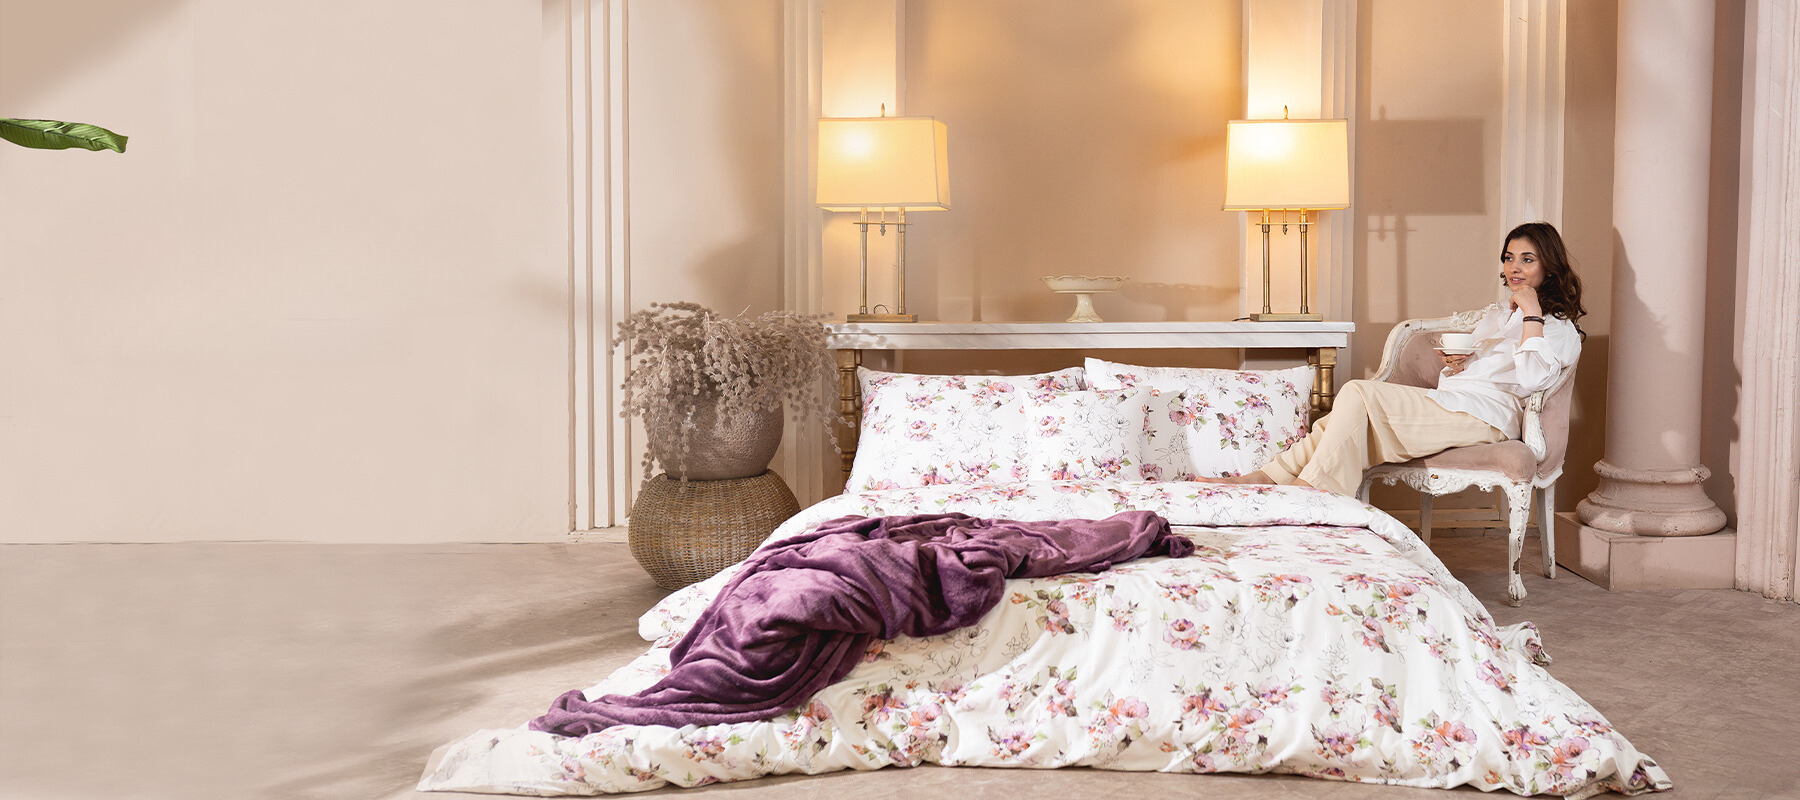 The Linen Company presents new designs in their printed bedding collection